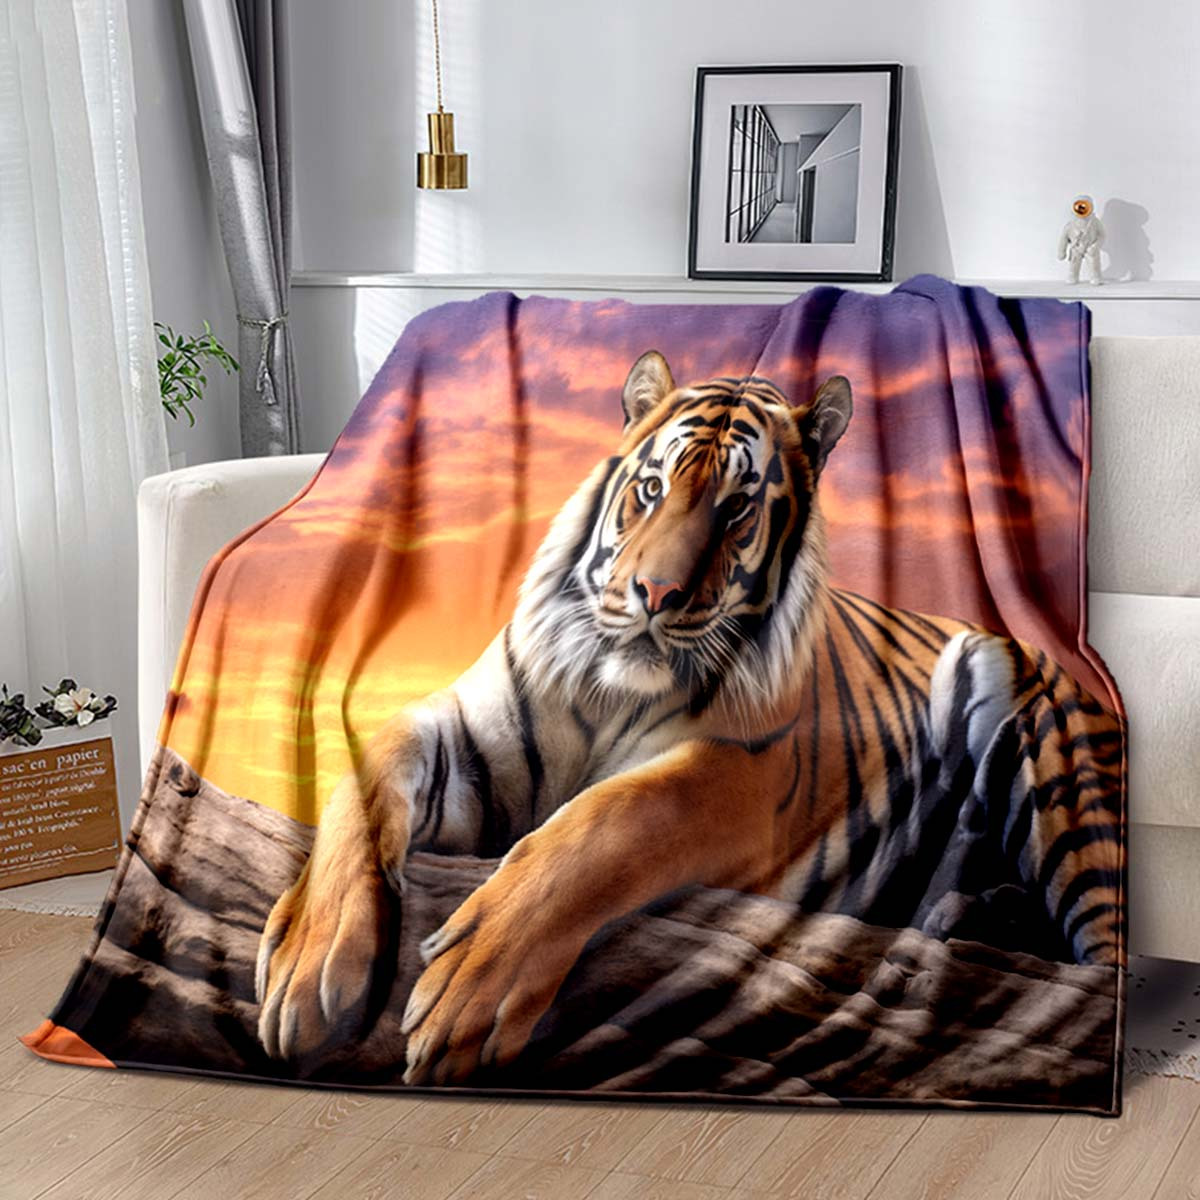 

1pc Cozy Tiger Resting Design Printed Flannel Blanket, Soft Warm Throw Blanket Nap Blanket For Couch Sofa Office Bed Camping Travelling, Multi-purpose Holiday Gift Blanket